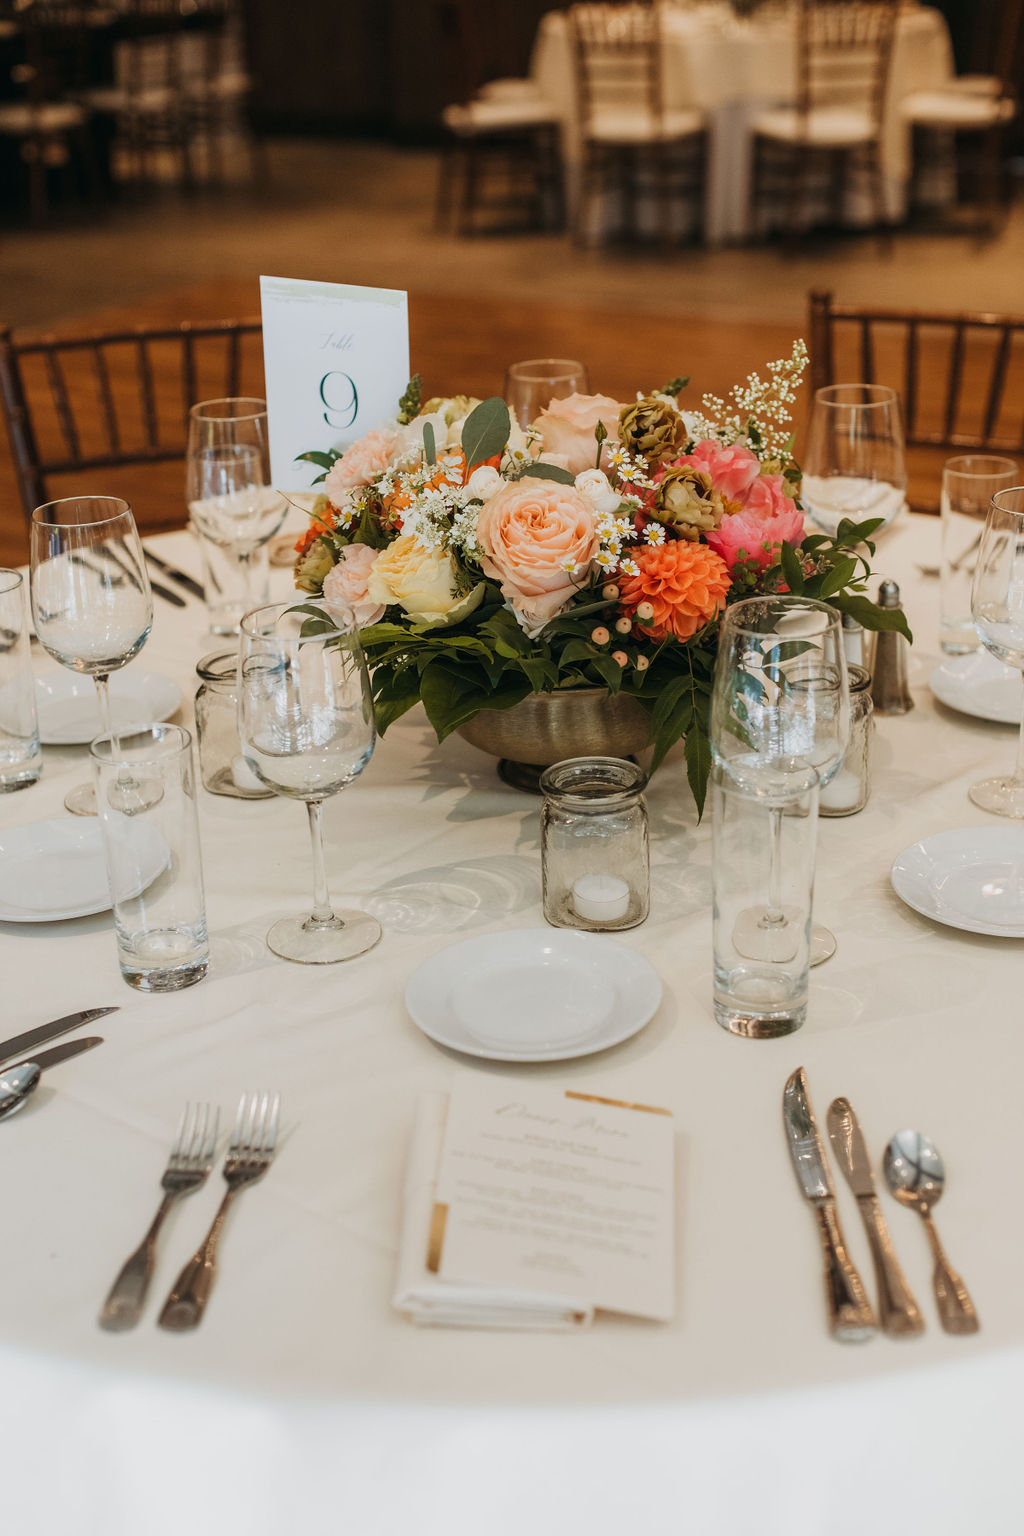 wedding reception at Calamigos Ranch with wooden chairs and orange and pink floral table arrangements